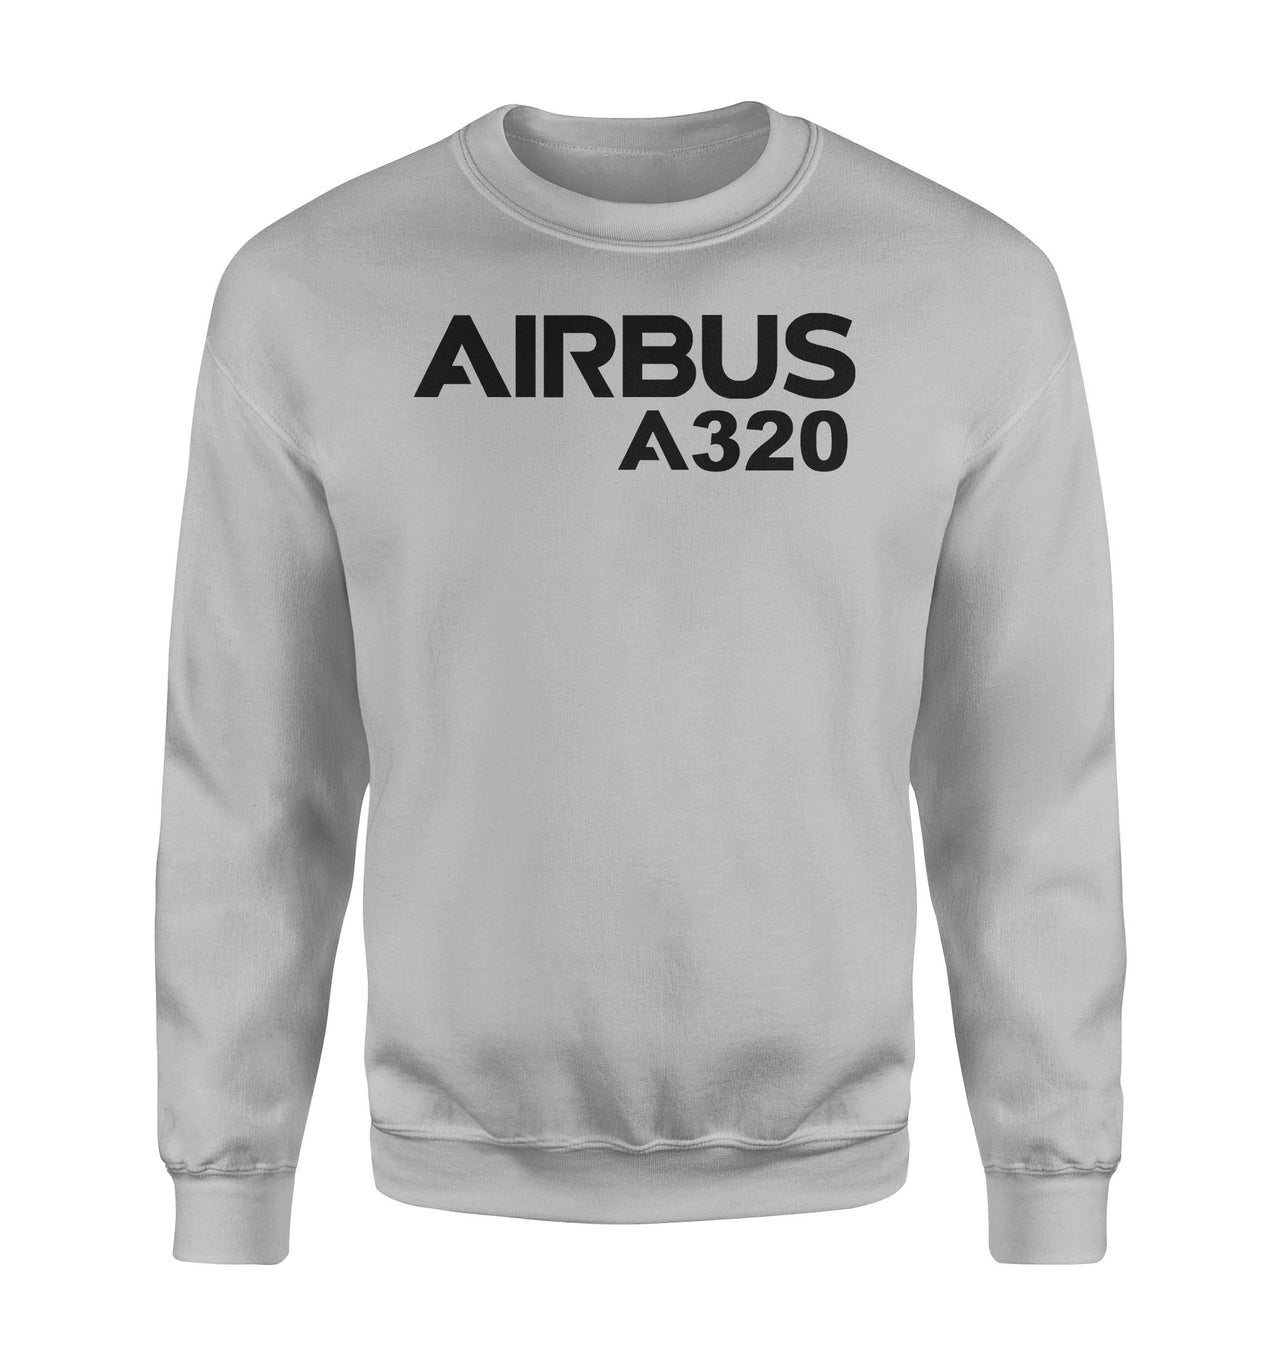 Airbus A320 & Text Designed Sweatshirts